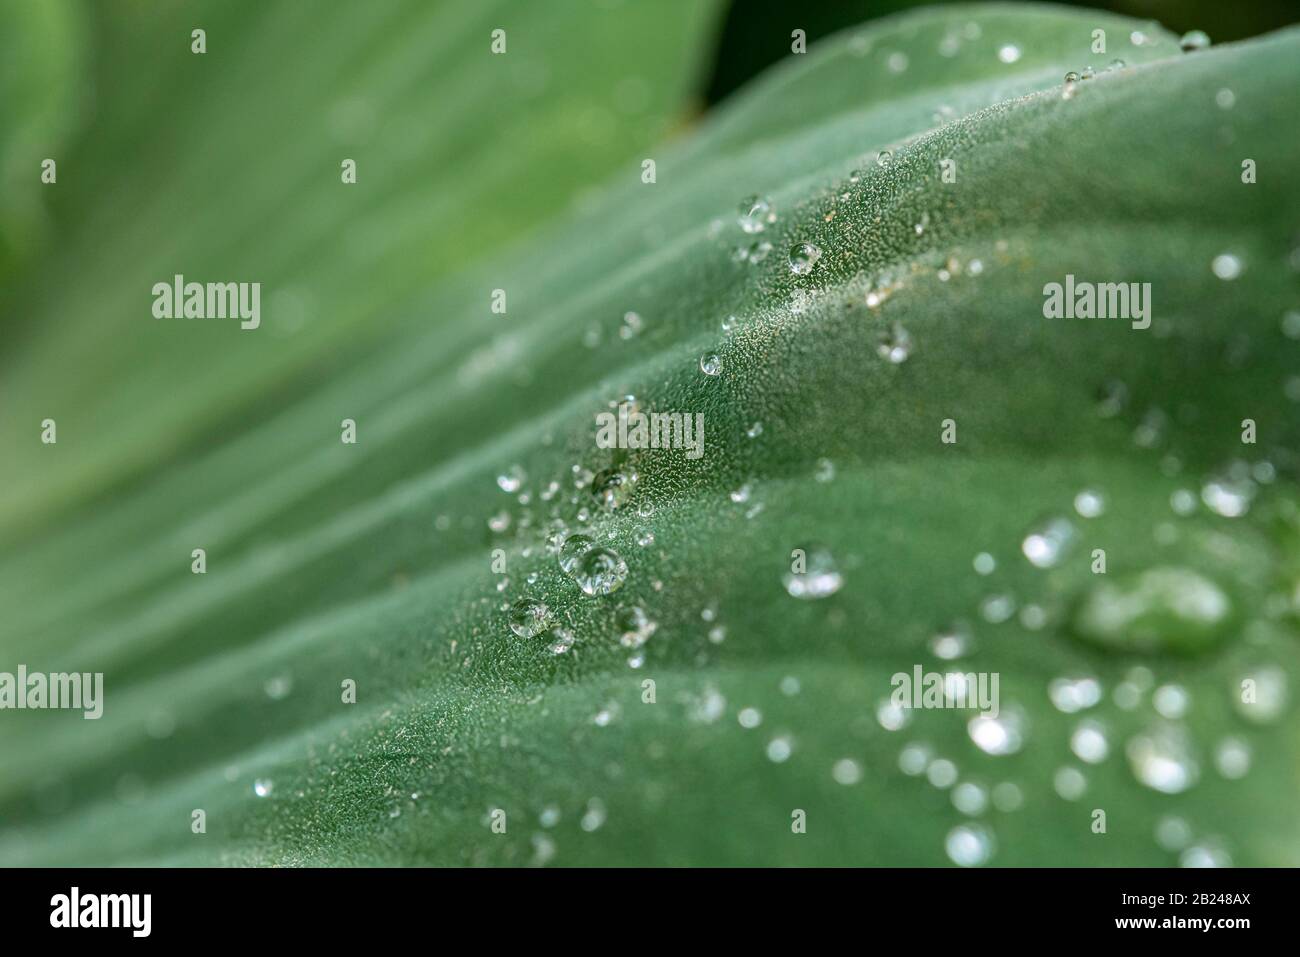 Water cabbage (Pistia stratiotes), lotus effect, water drops on a leaf, Botanical Garden Berlin, Berlin, Germany Stock Photo